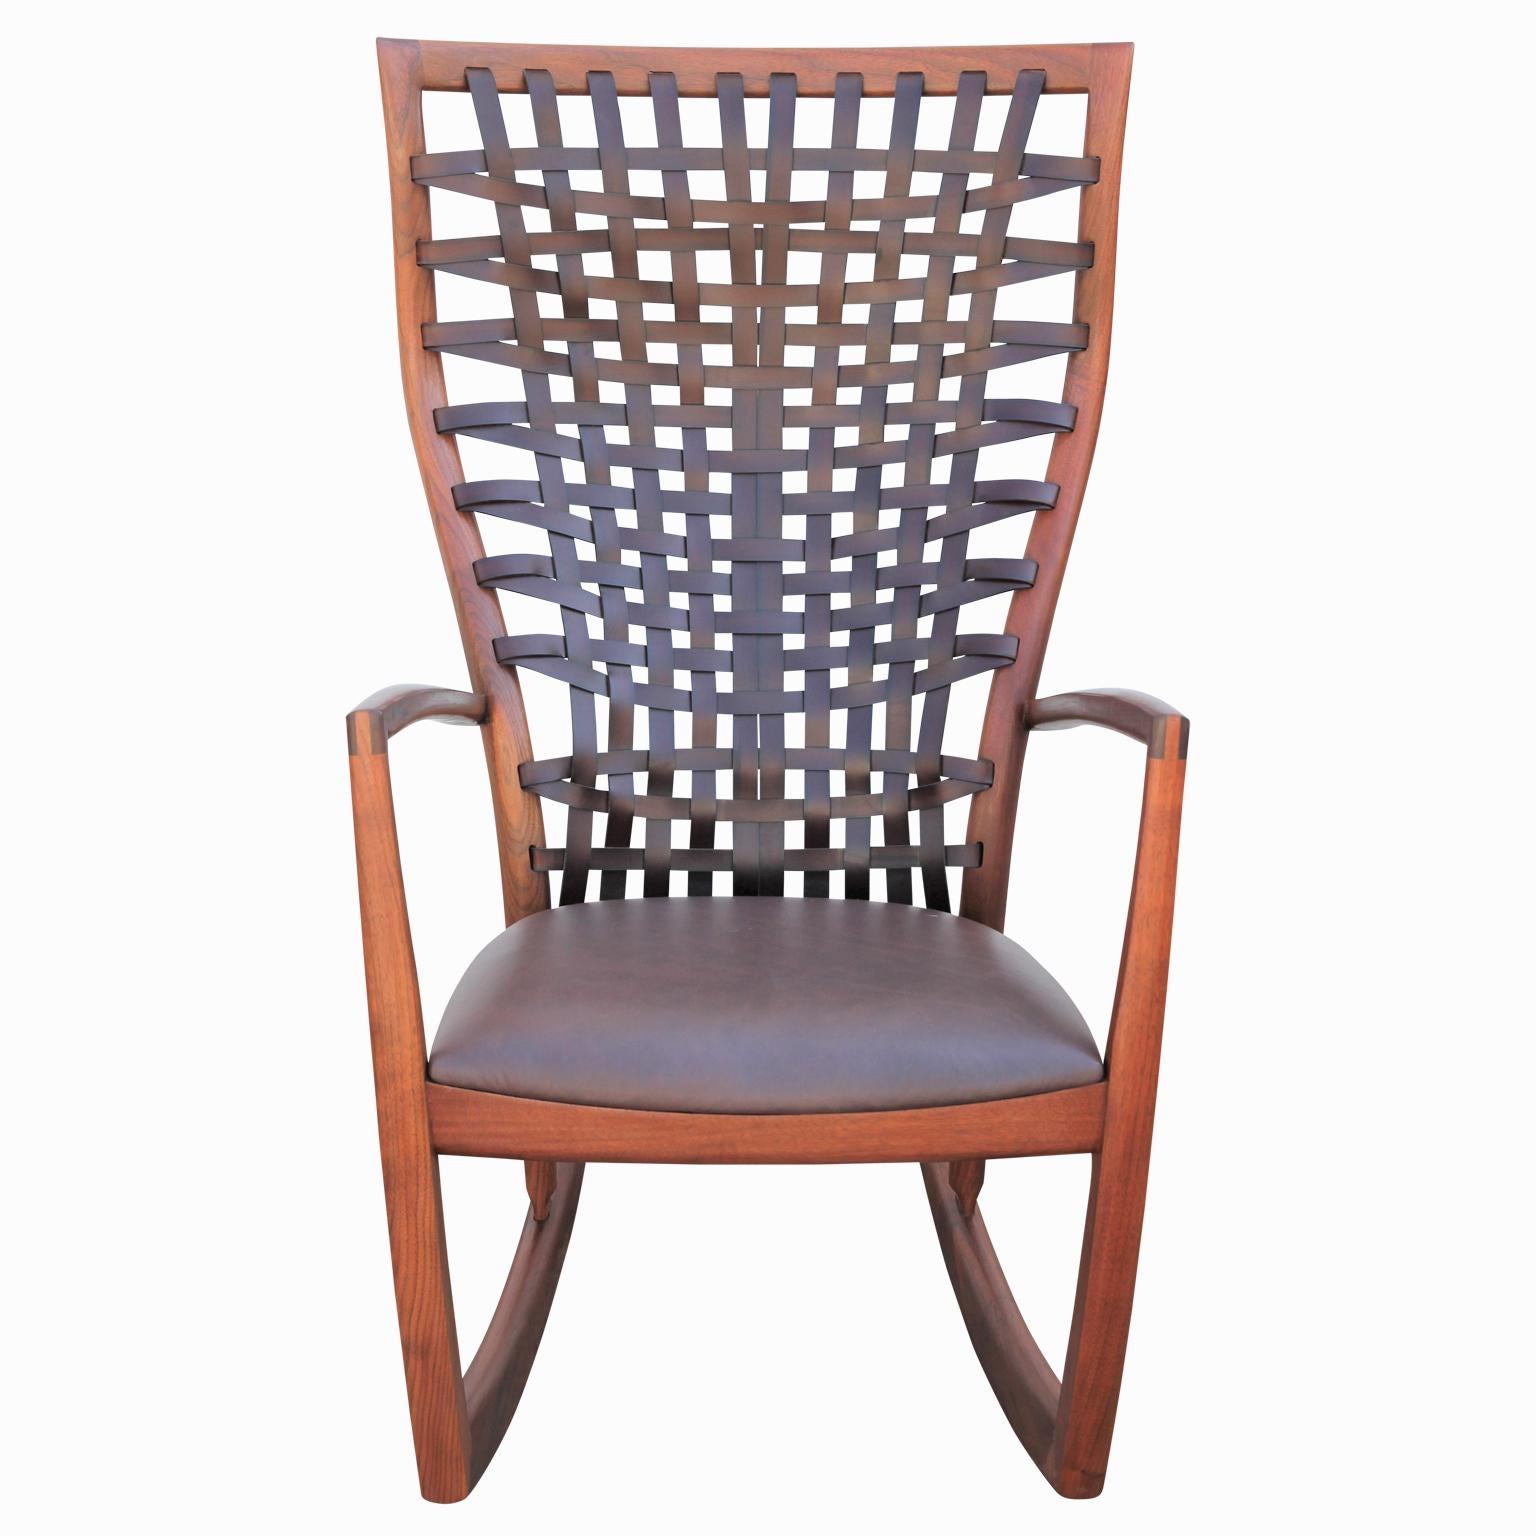 Exquisite handmade rocking chair made from walnut with a leather seat and woven leather backing. This sculptural rocking chair has a pair available. The maker, Roger Deatherage is a proudly lives and works in Houston, Texas.